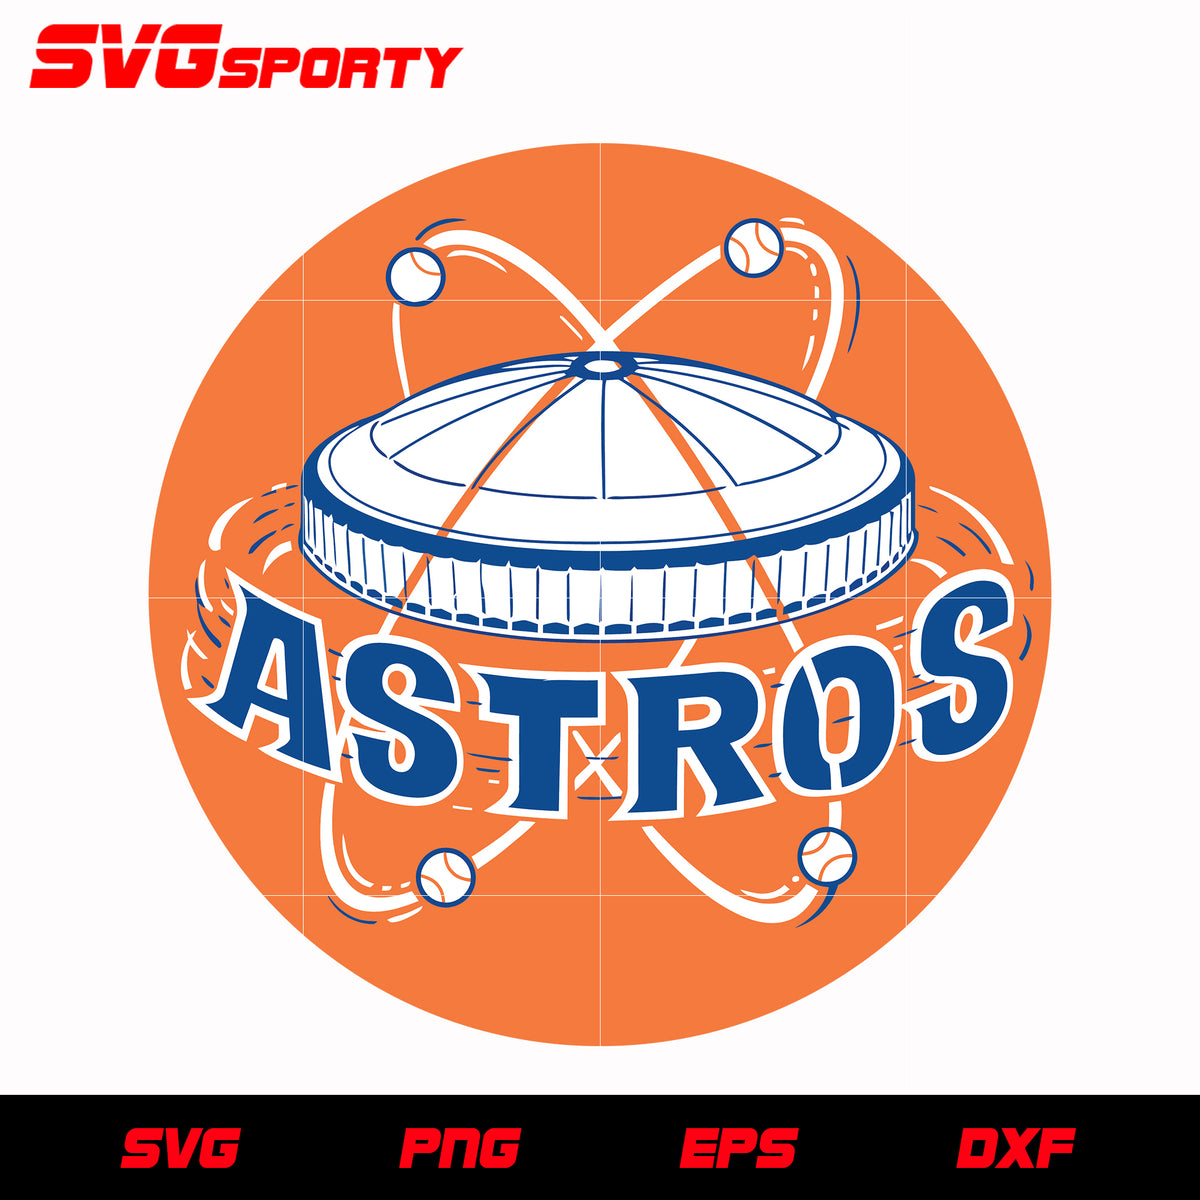 Houston Astros free SVG & PNG baseball cut files - Free SVG Download